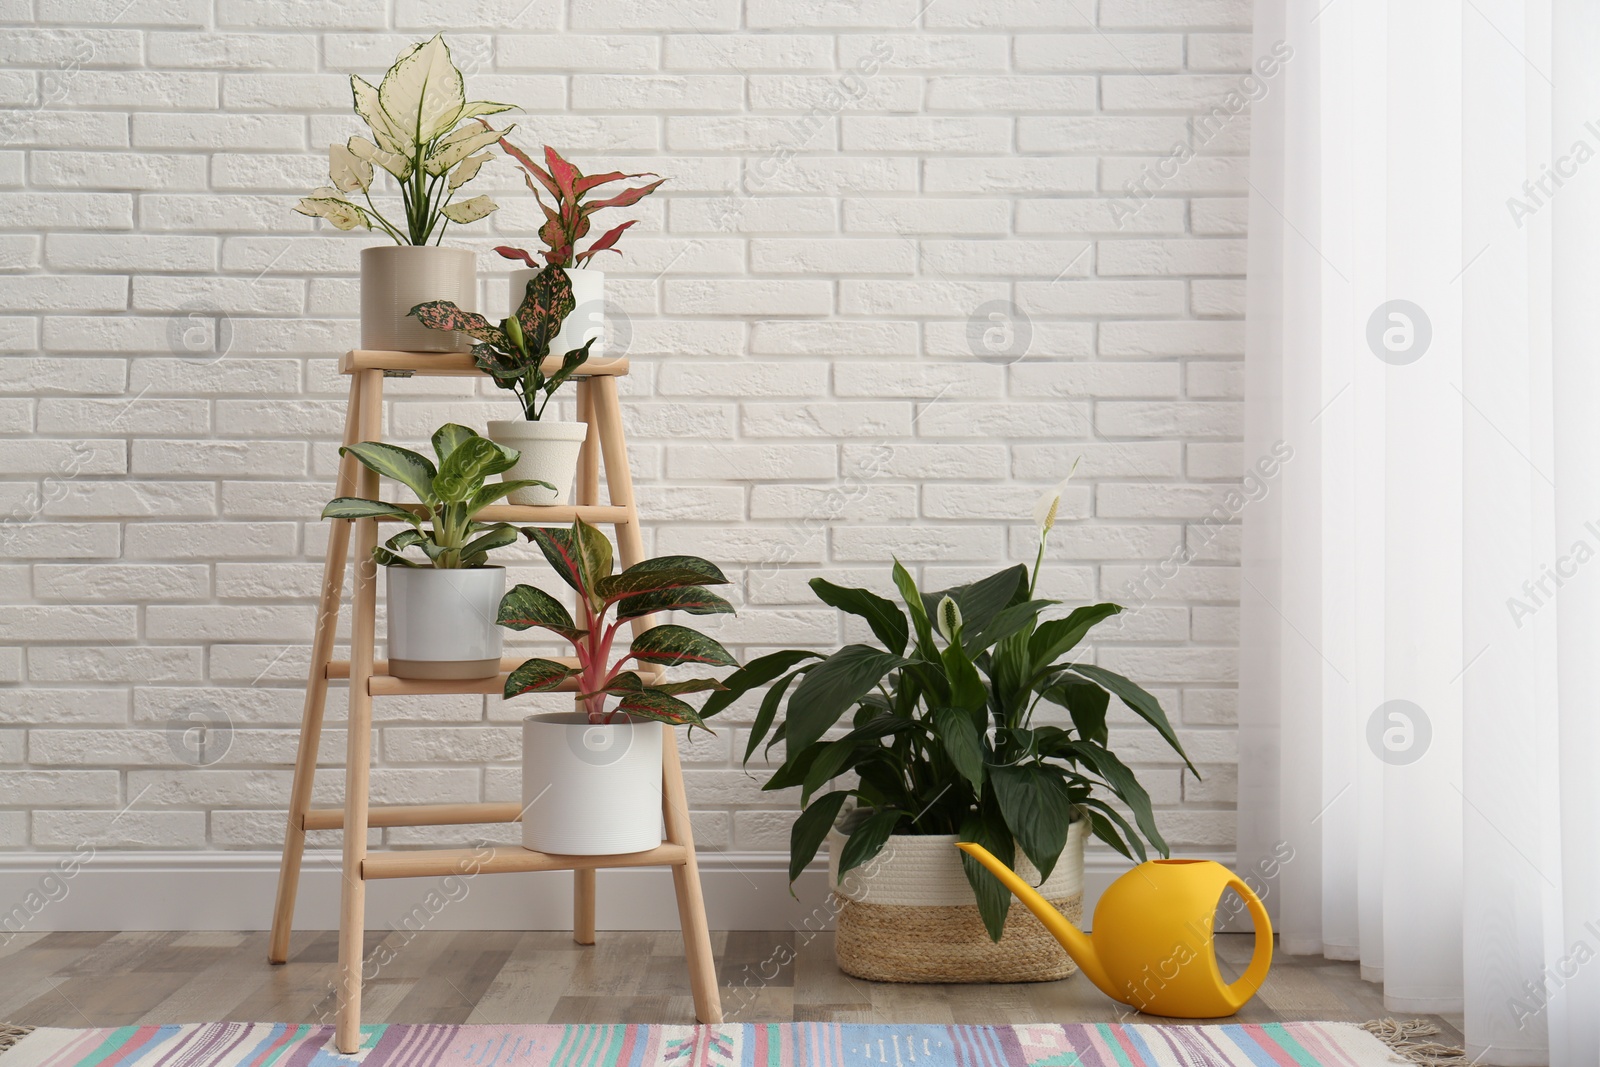 Photo of Exotic houseplants with beautiful leaves and decorative ladder near white brick wall in room